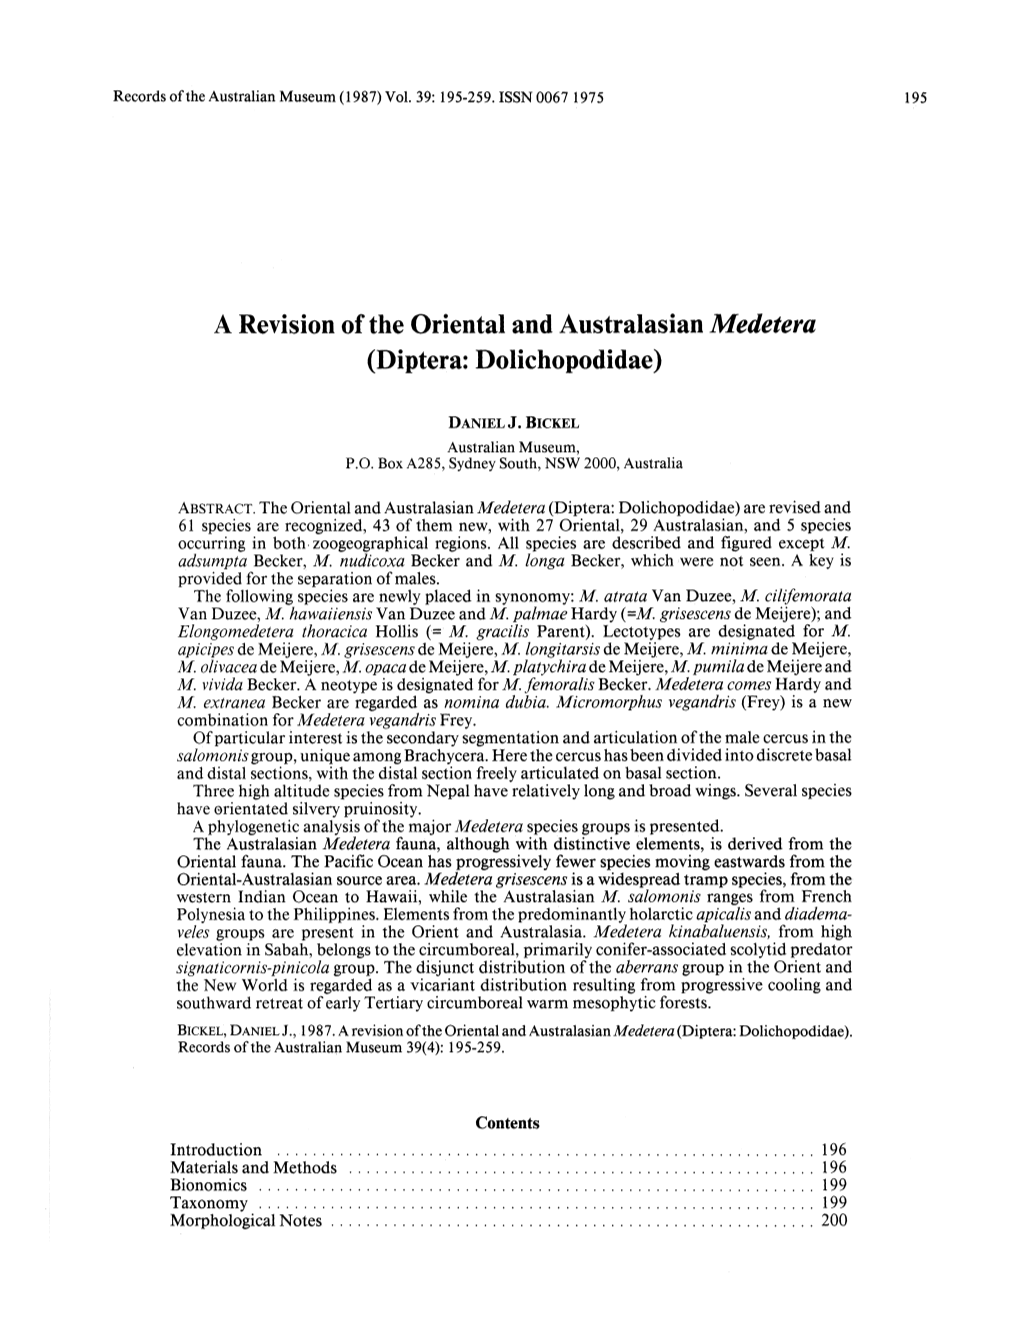 A Revision of the Oriental and Australasian Medetera (Diptera: Dolichopodidae)